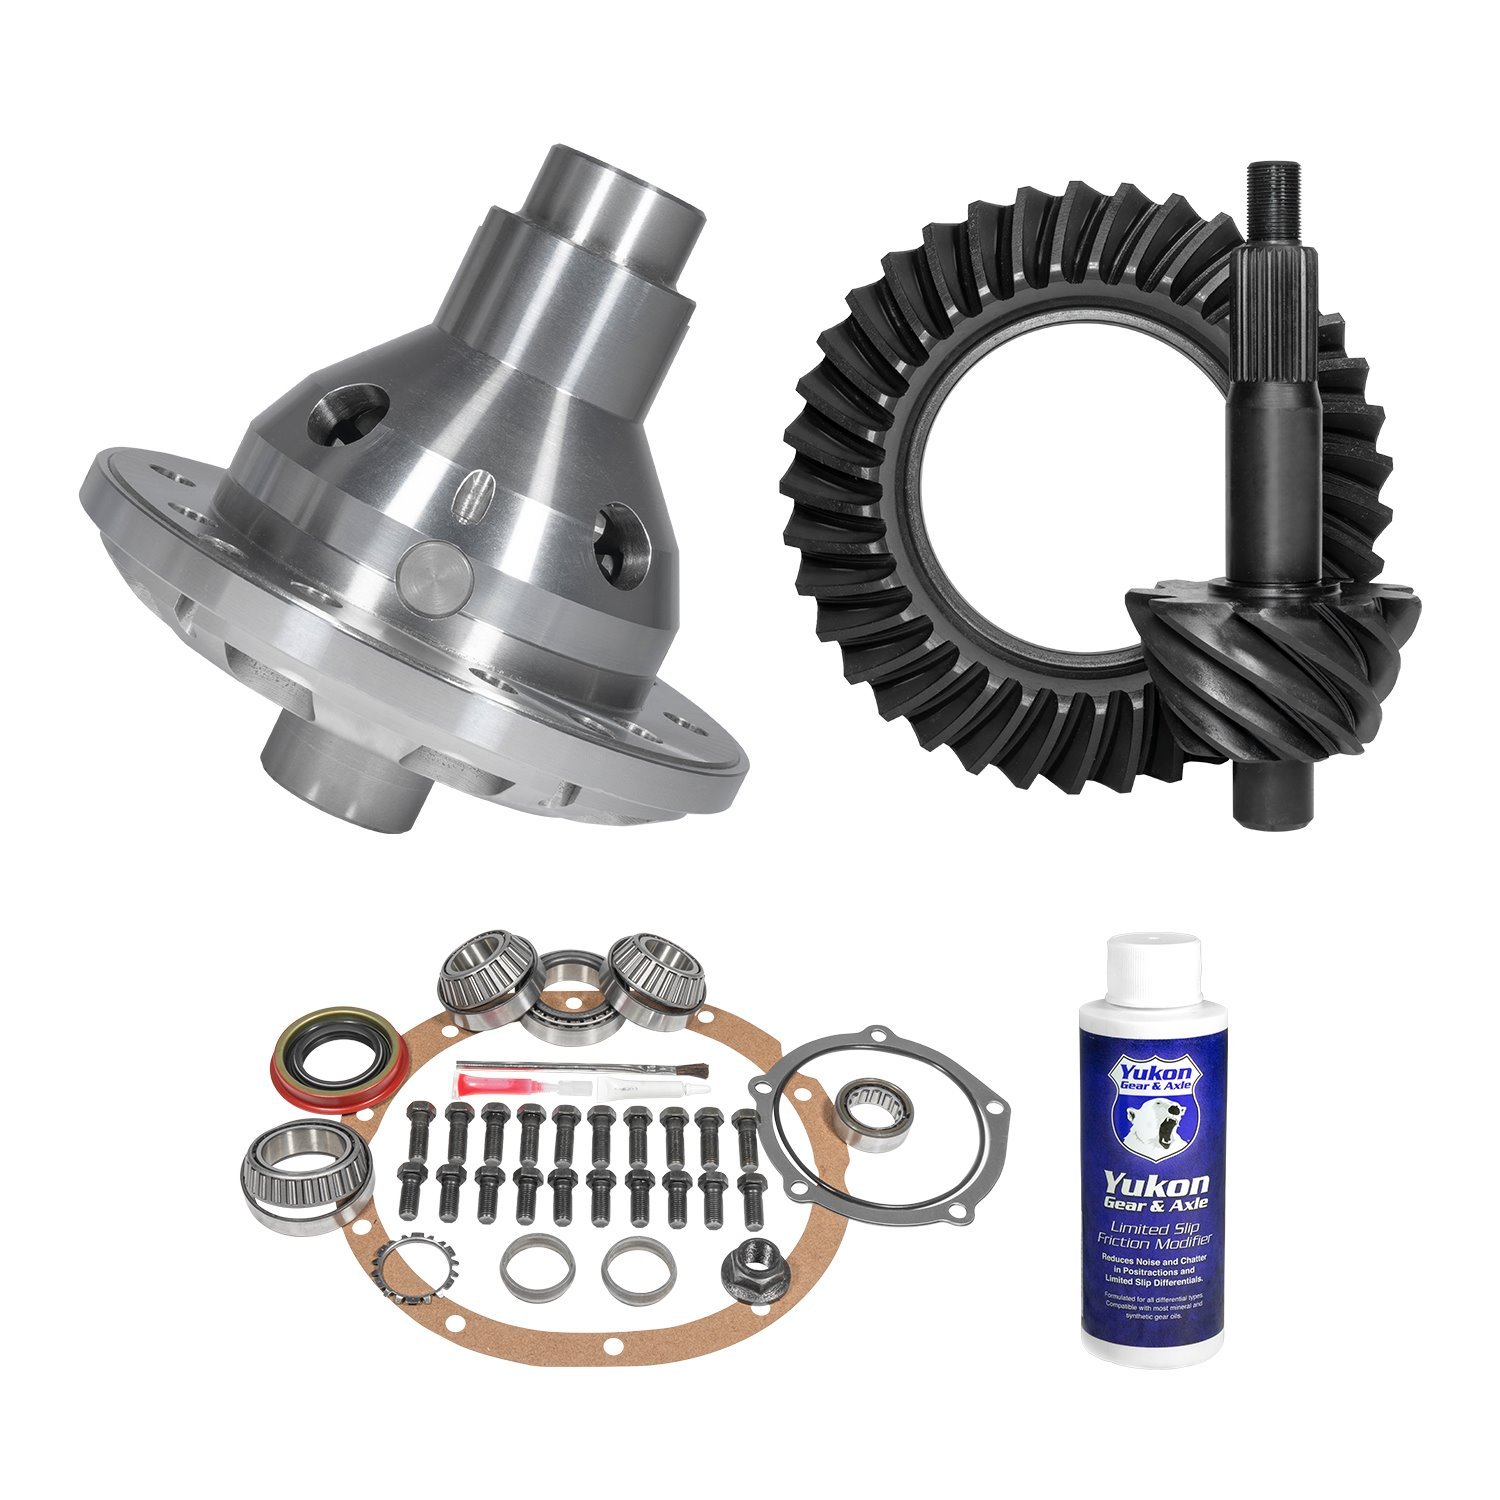 Muscle Car Limited Slip & Re-Gear Kit For Ford 9 in., 28 Spline, 3.89 Ratio